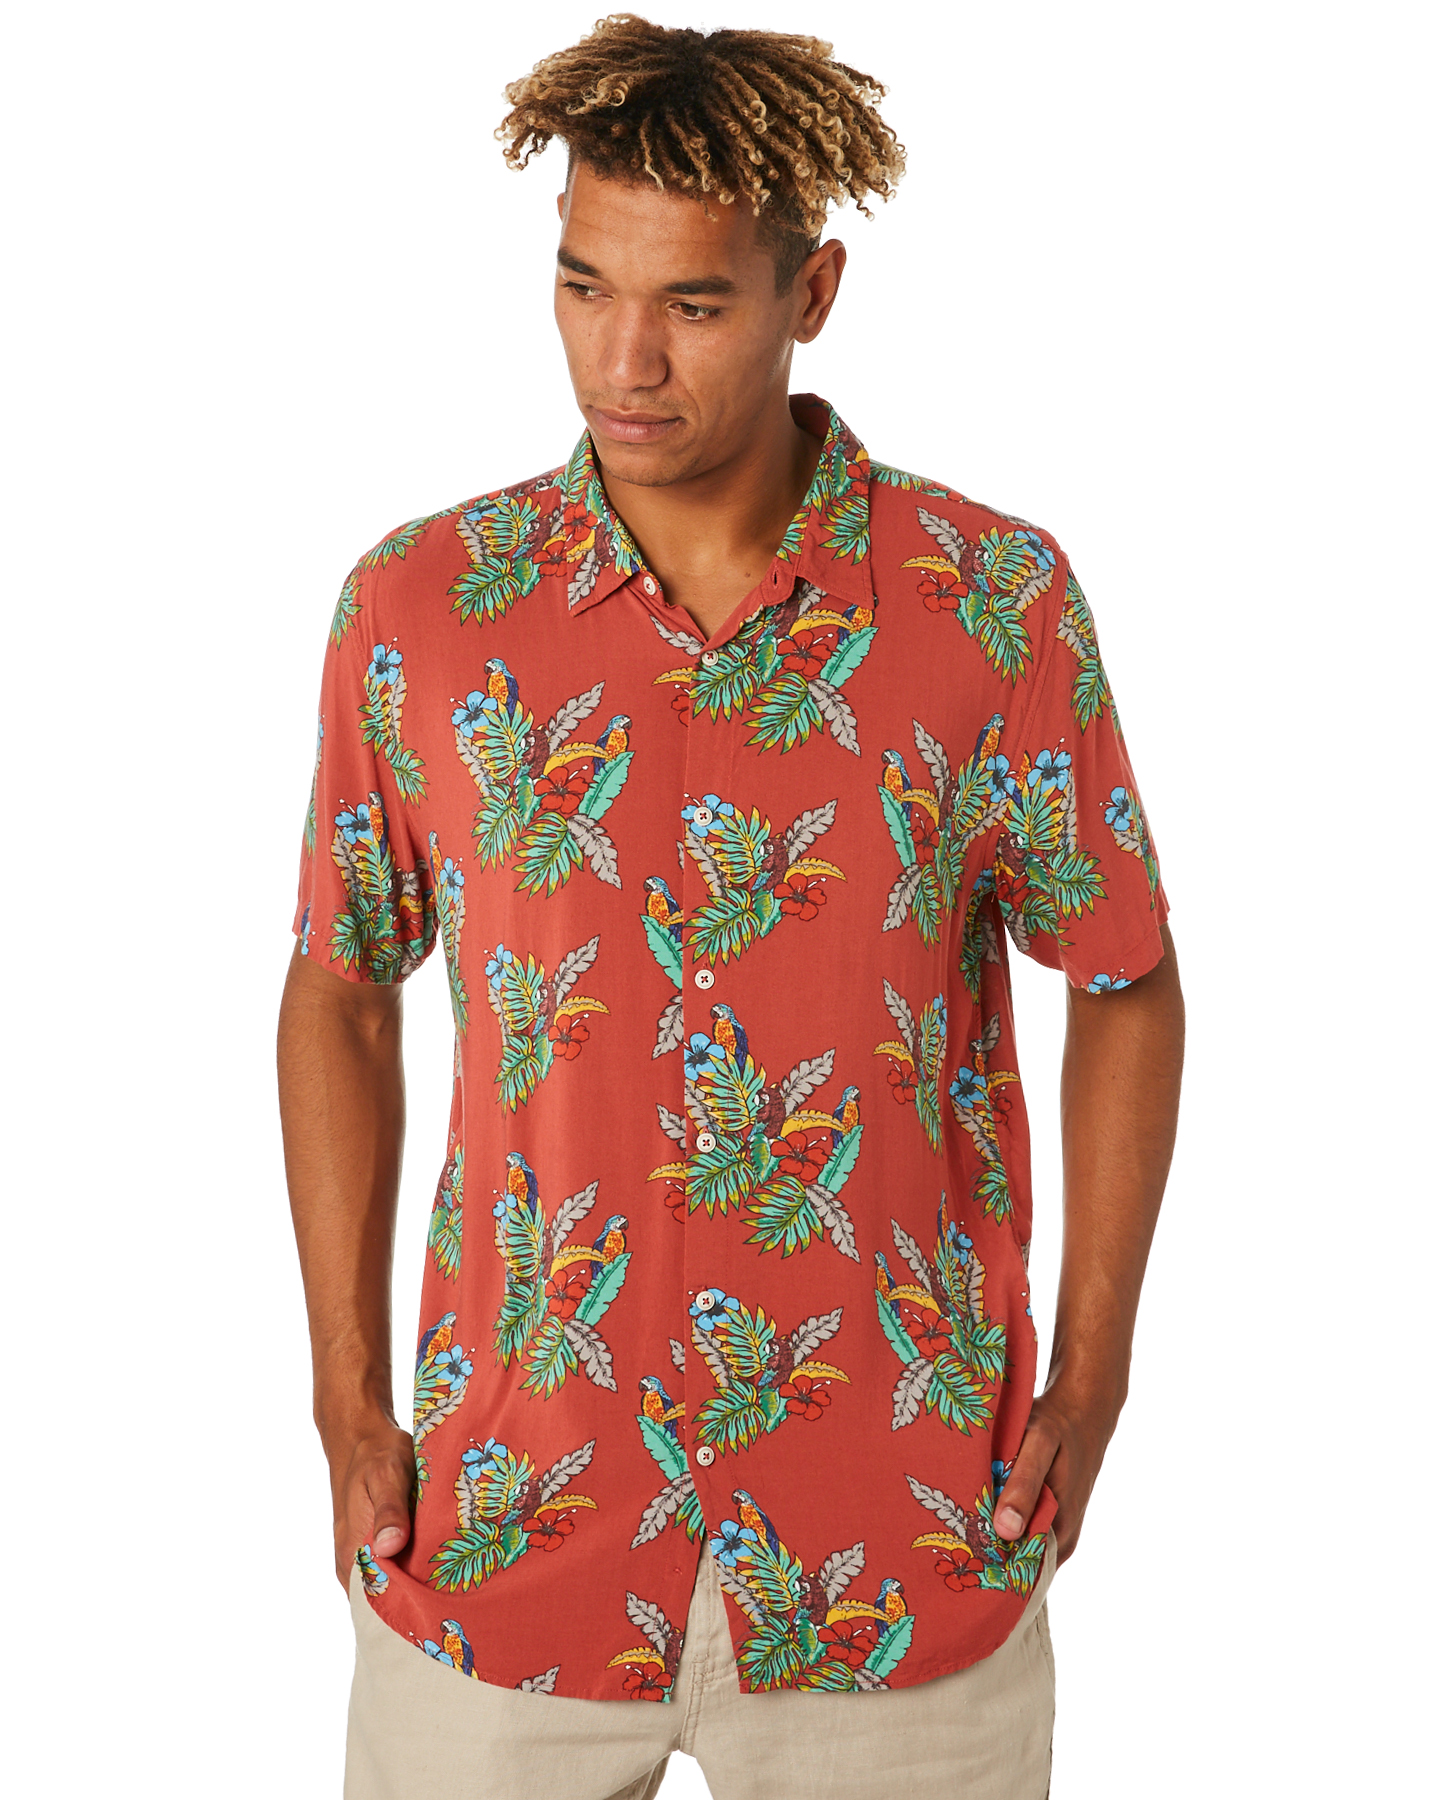 Barney Cools Holiday Mens Ss Shirt - Red Parrot | SurfStitch